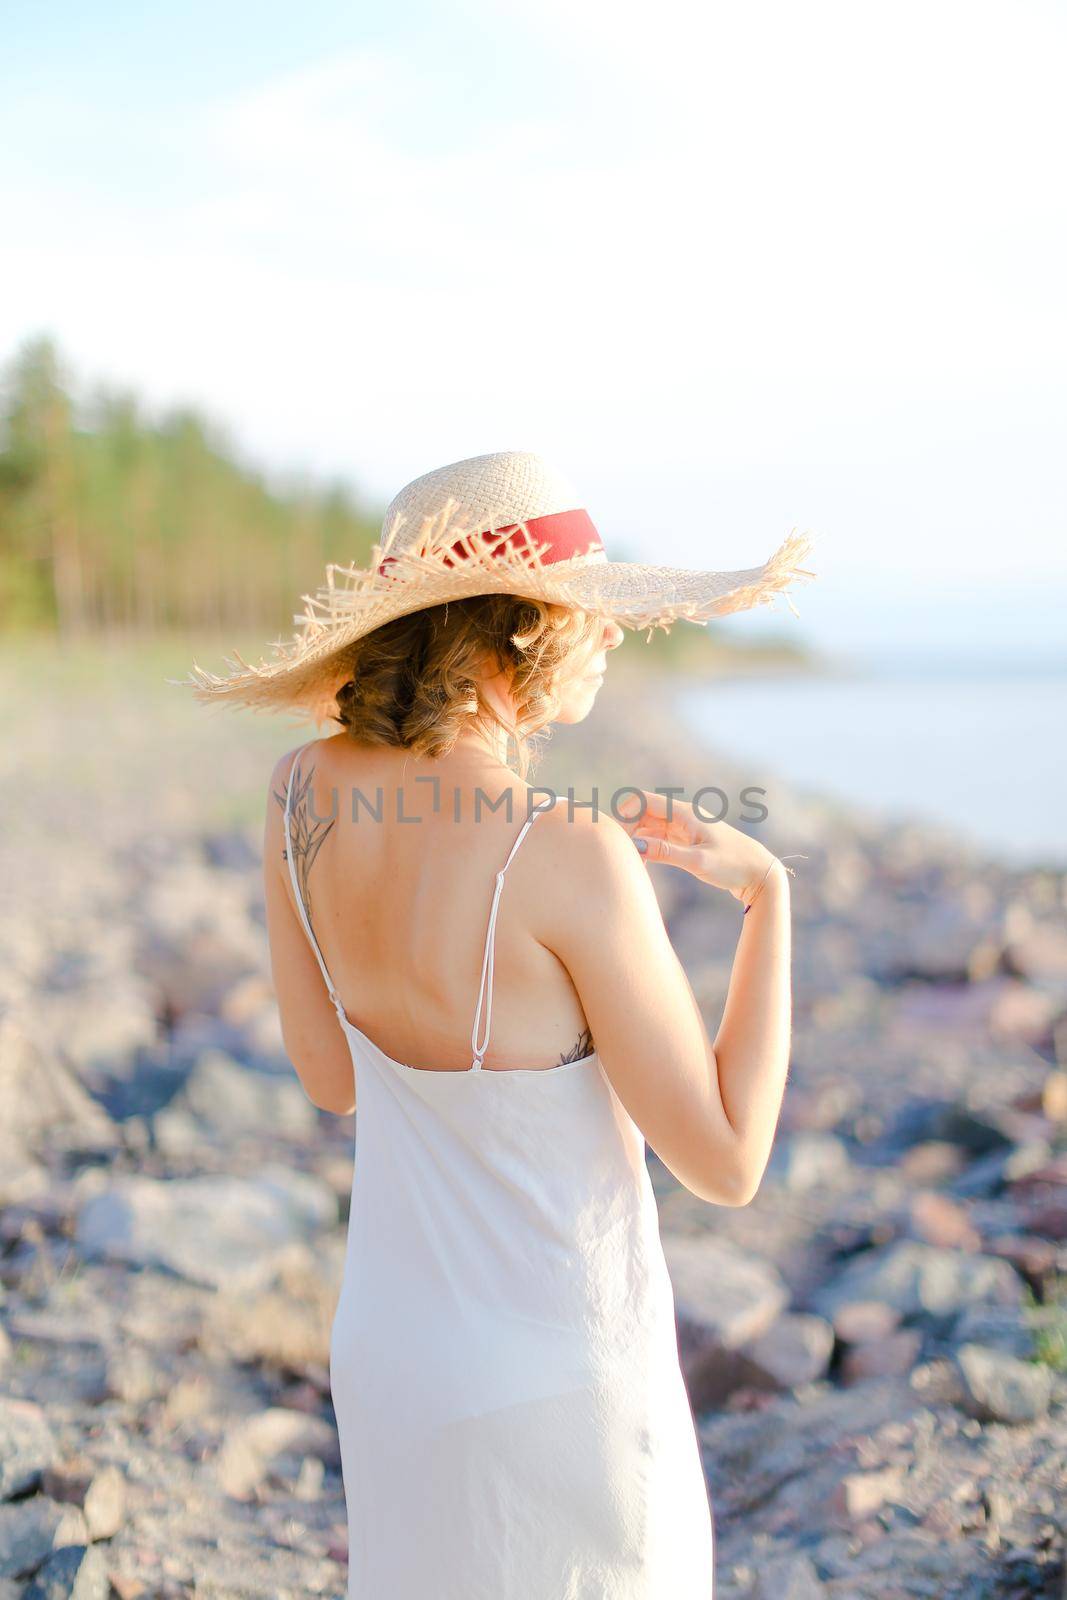 Back view of girl in hat with red ribbon walking on shingle beach. Concept of summer vacations and resort.